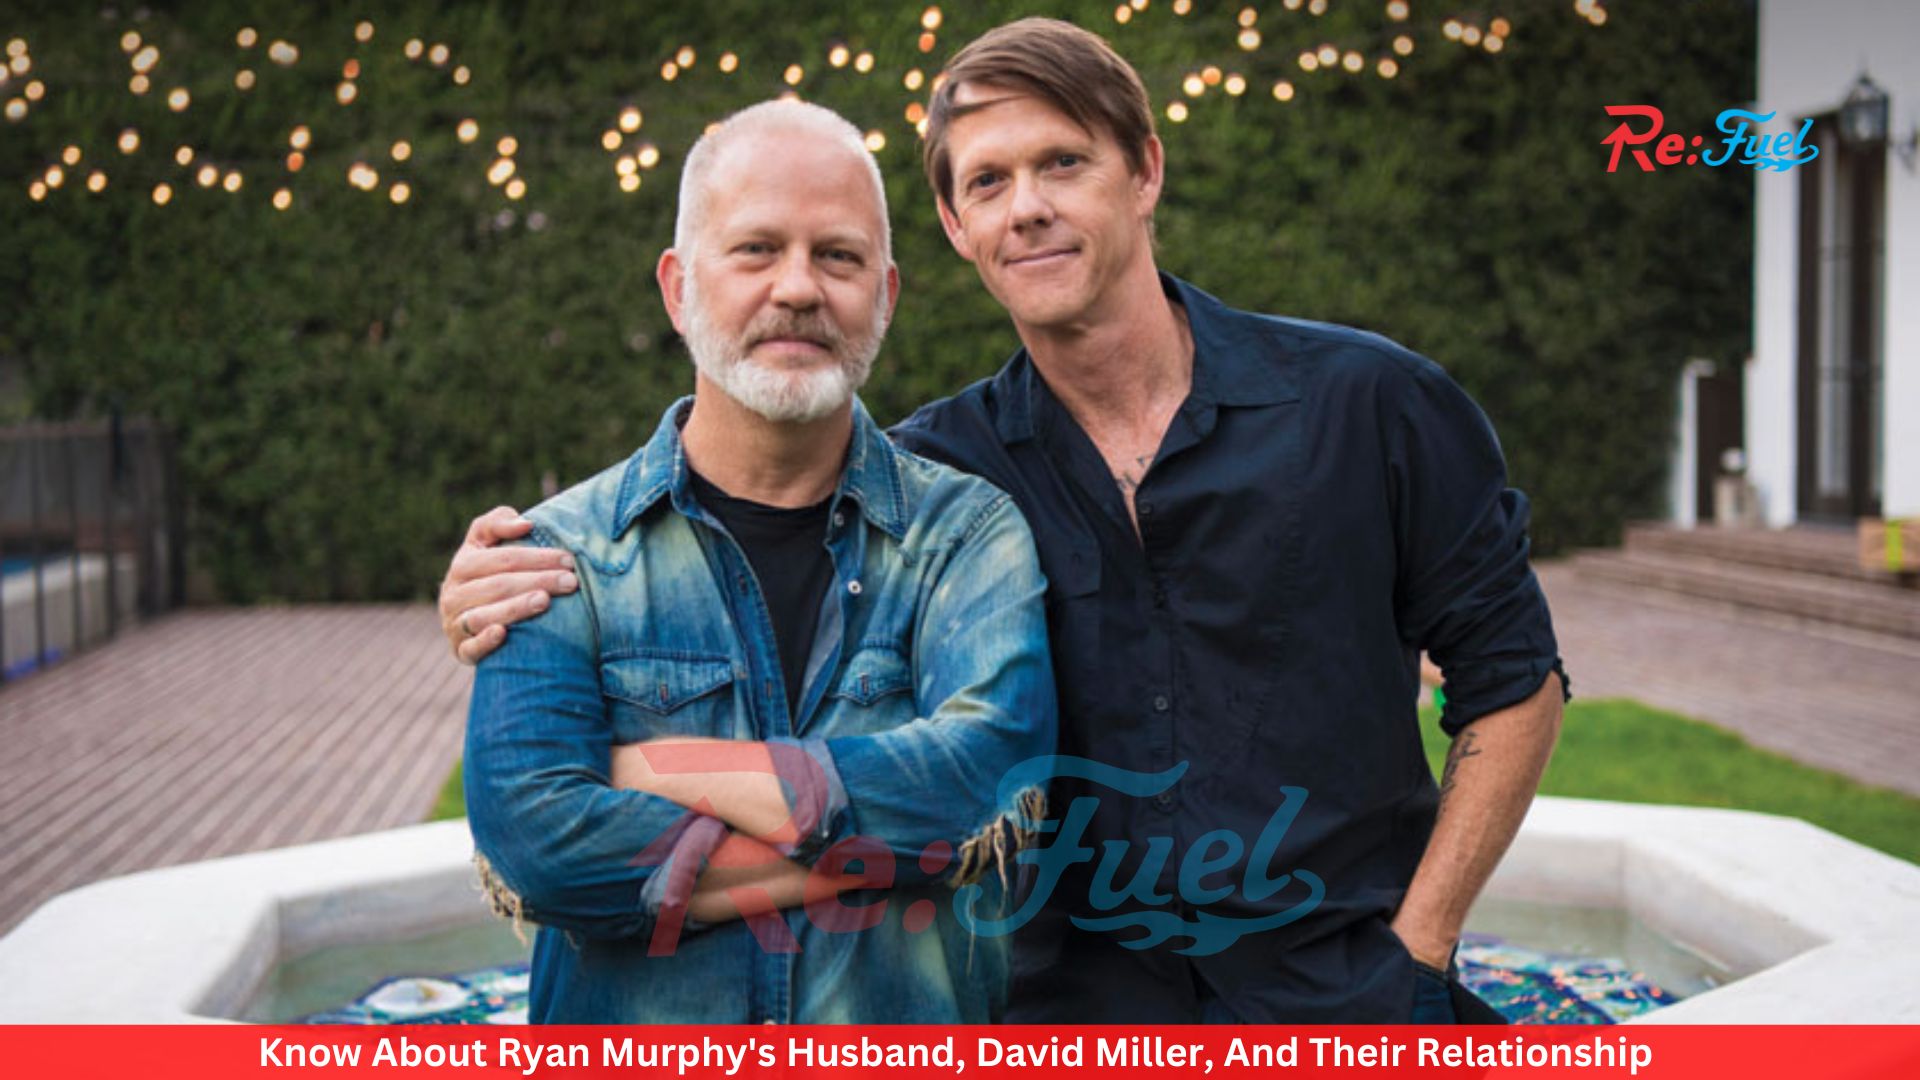 Know About Ryan Murphy's Husband, David Miller, And Their Relationship